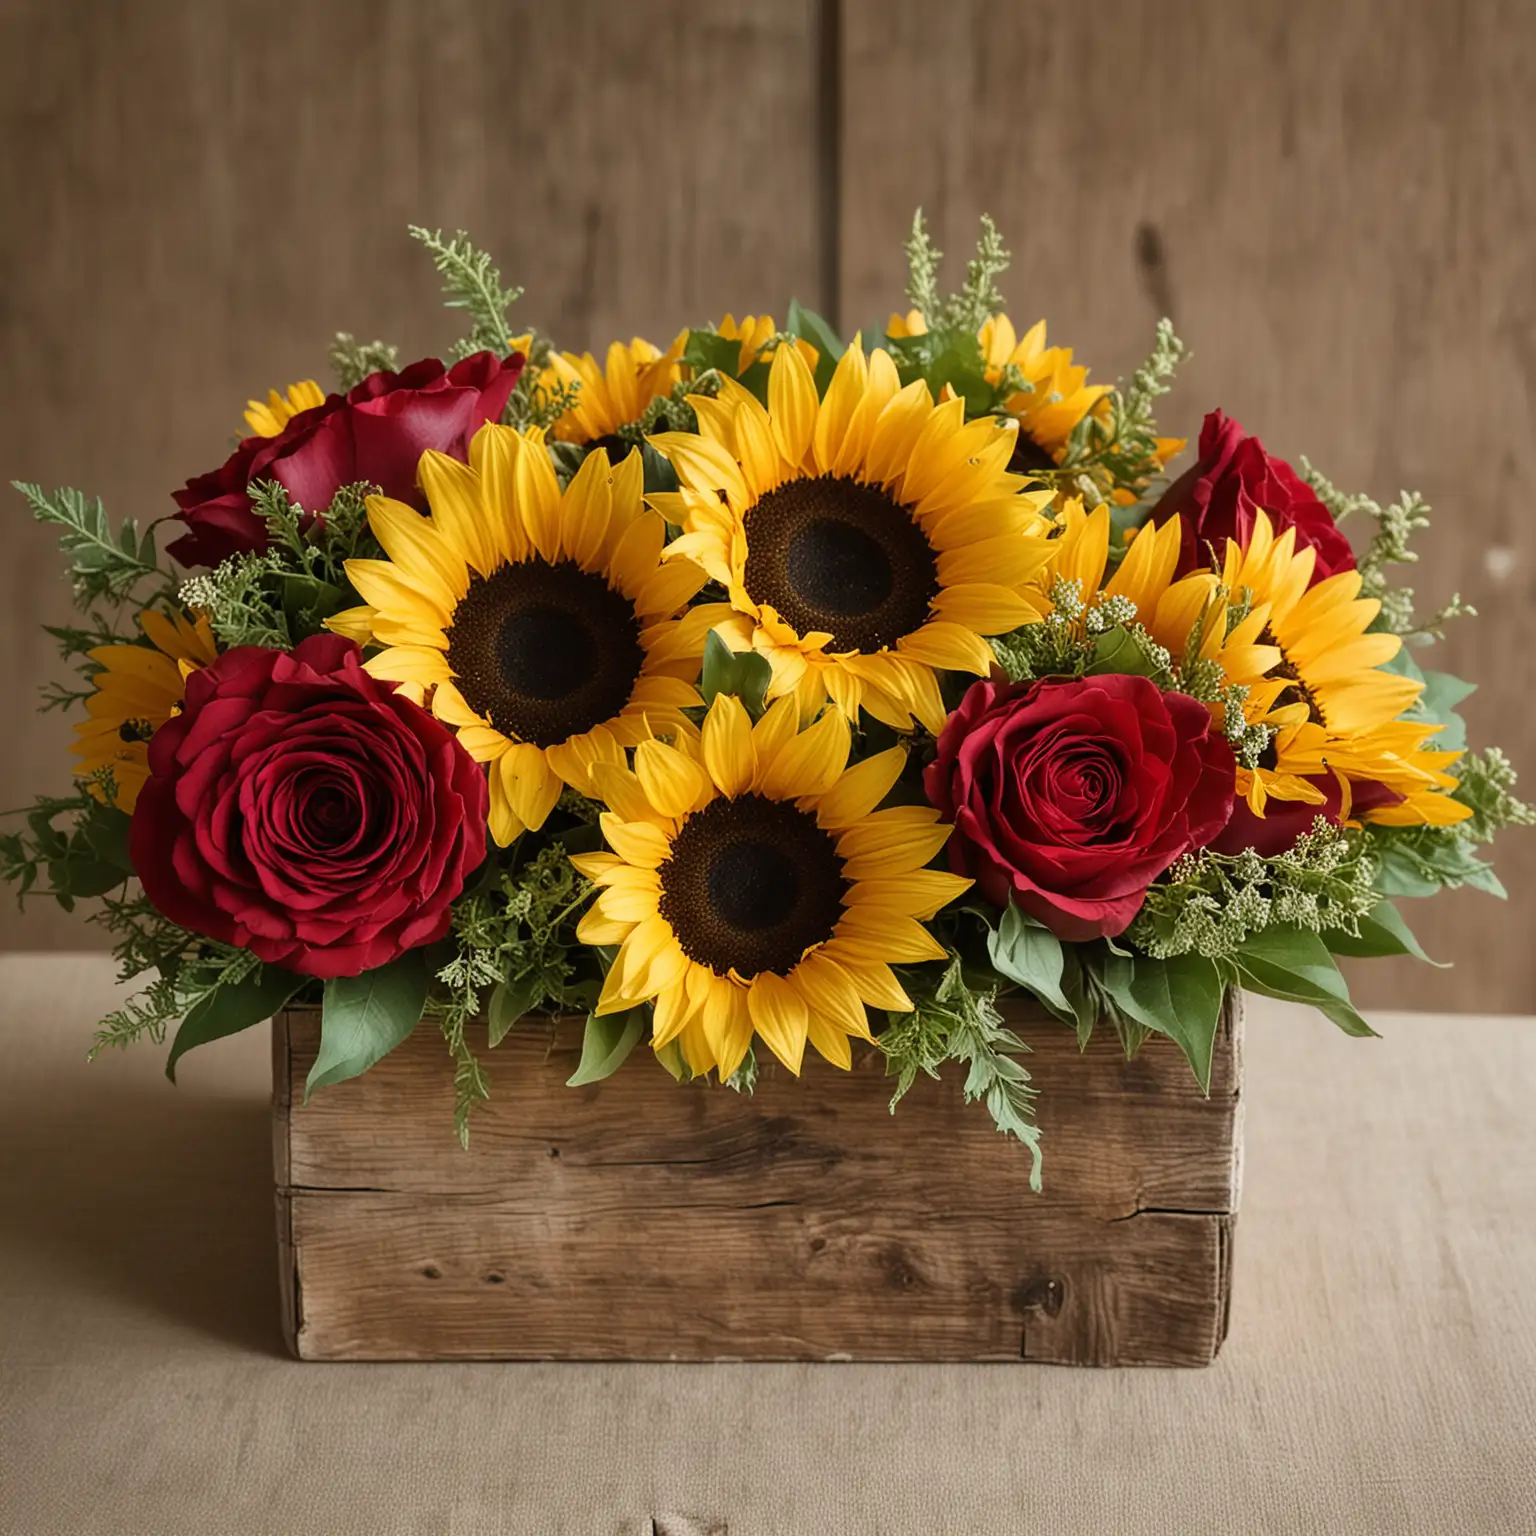 a simple rustic centerpiece with sunflowers and red roses